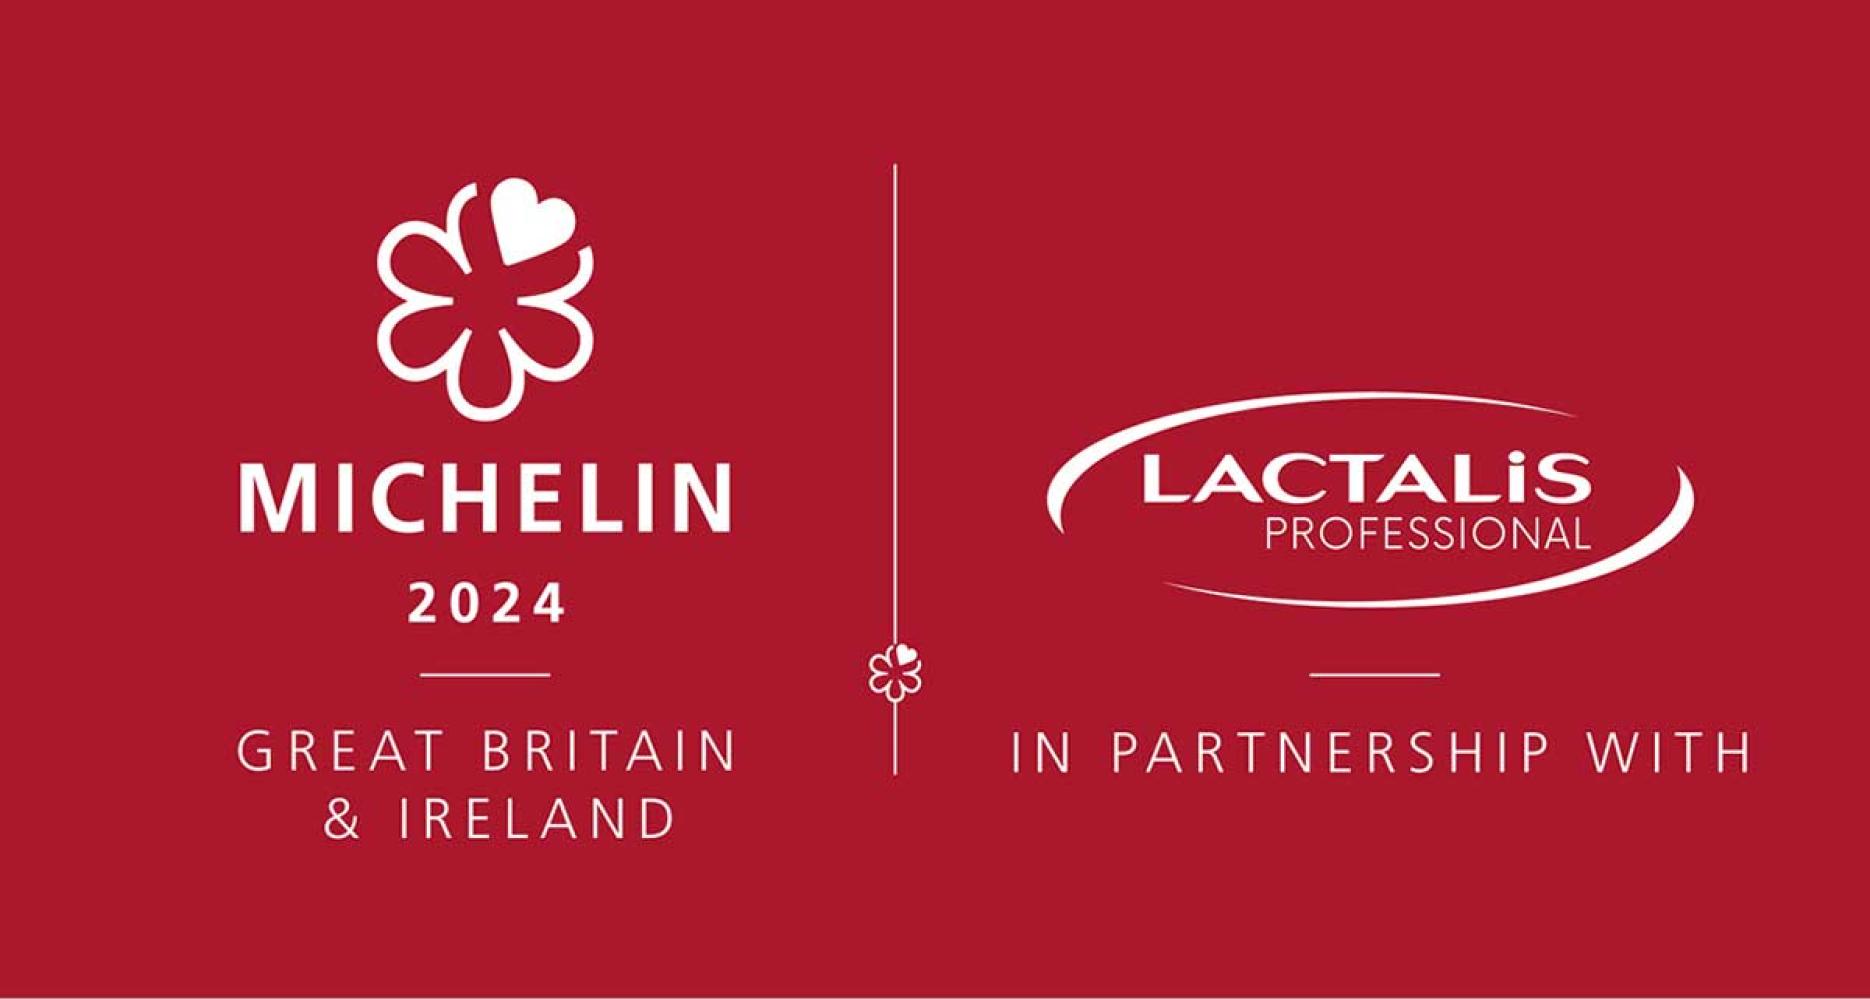 Lactalis Professional partners with The Michelin Guide